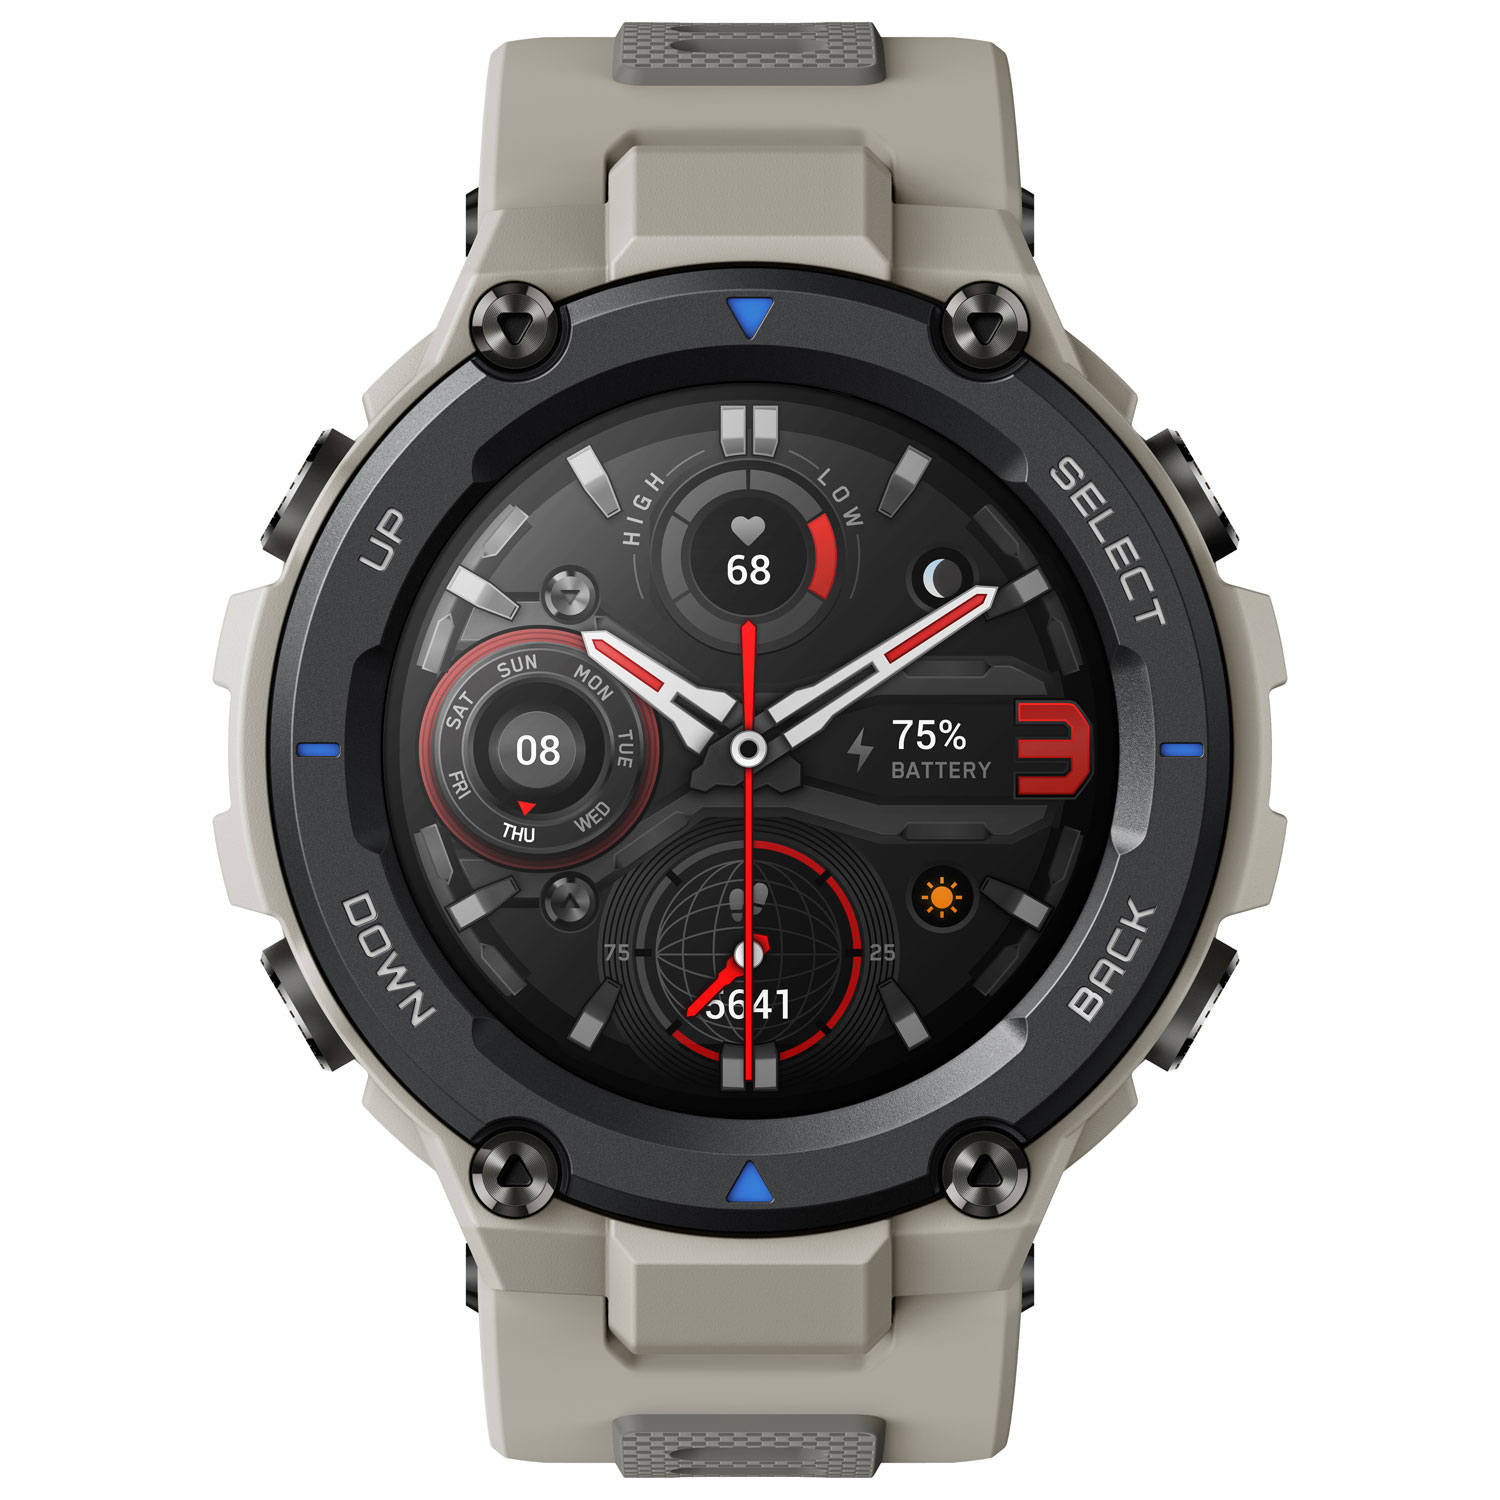 Amazfit T-Rex Pro Smartwatch with Heart Rate Monitor - Grey